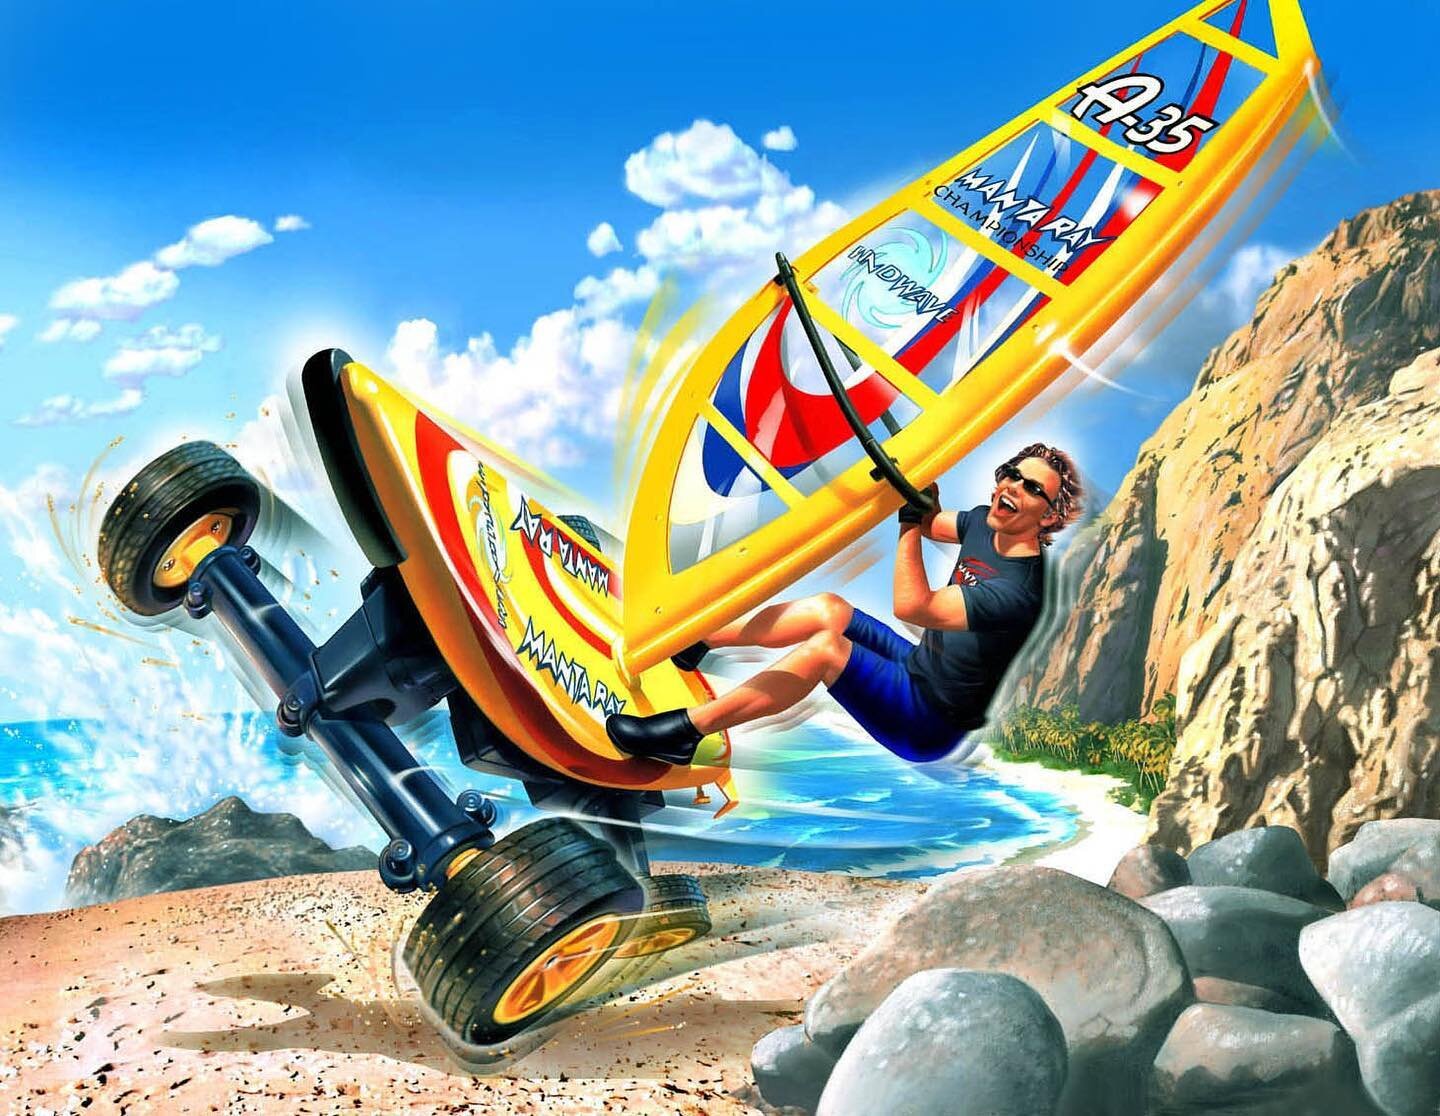 2001 Manta Ray remote controlled wind surfer with &quot;awesome wheelie action&quot; from #radioshack. If you had $59.99 back then you could &quot;pretend you're a wind surfer on the beach &mdash;taste the salty air... and astound the crowd with jaw-